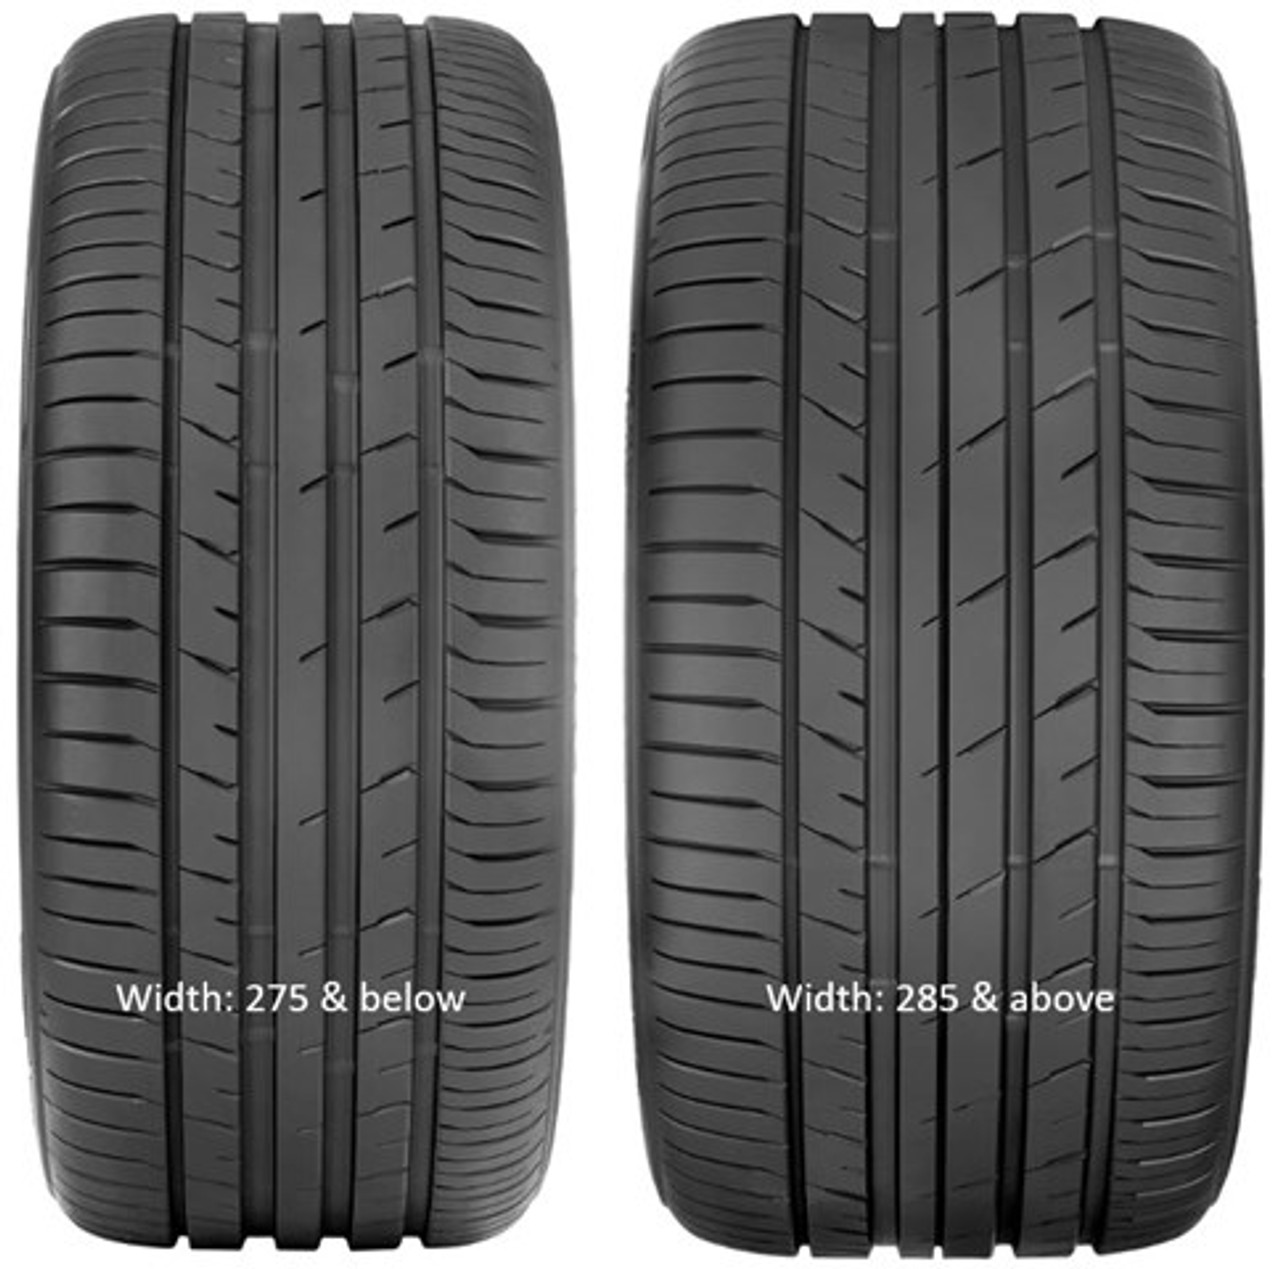 Toyo Proxes Sport 305/30ZR20 Max Performance Summer Tire 134720